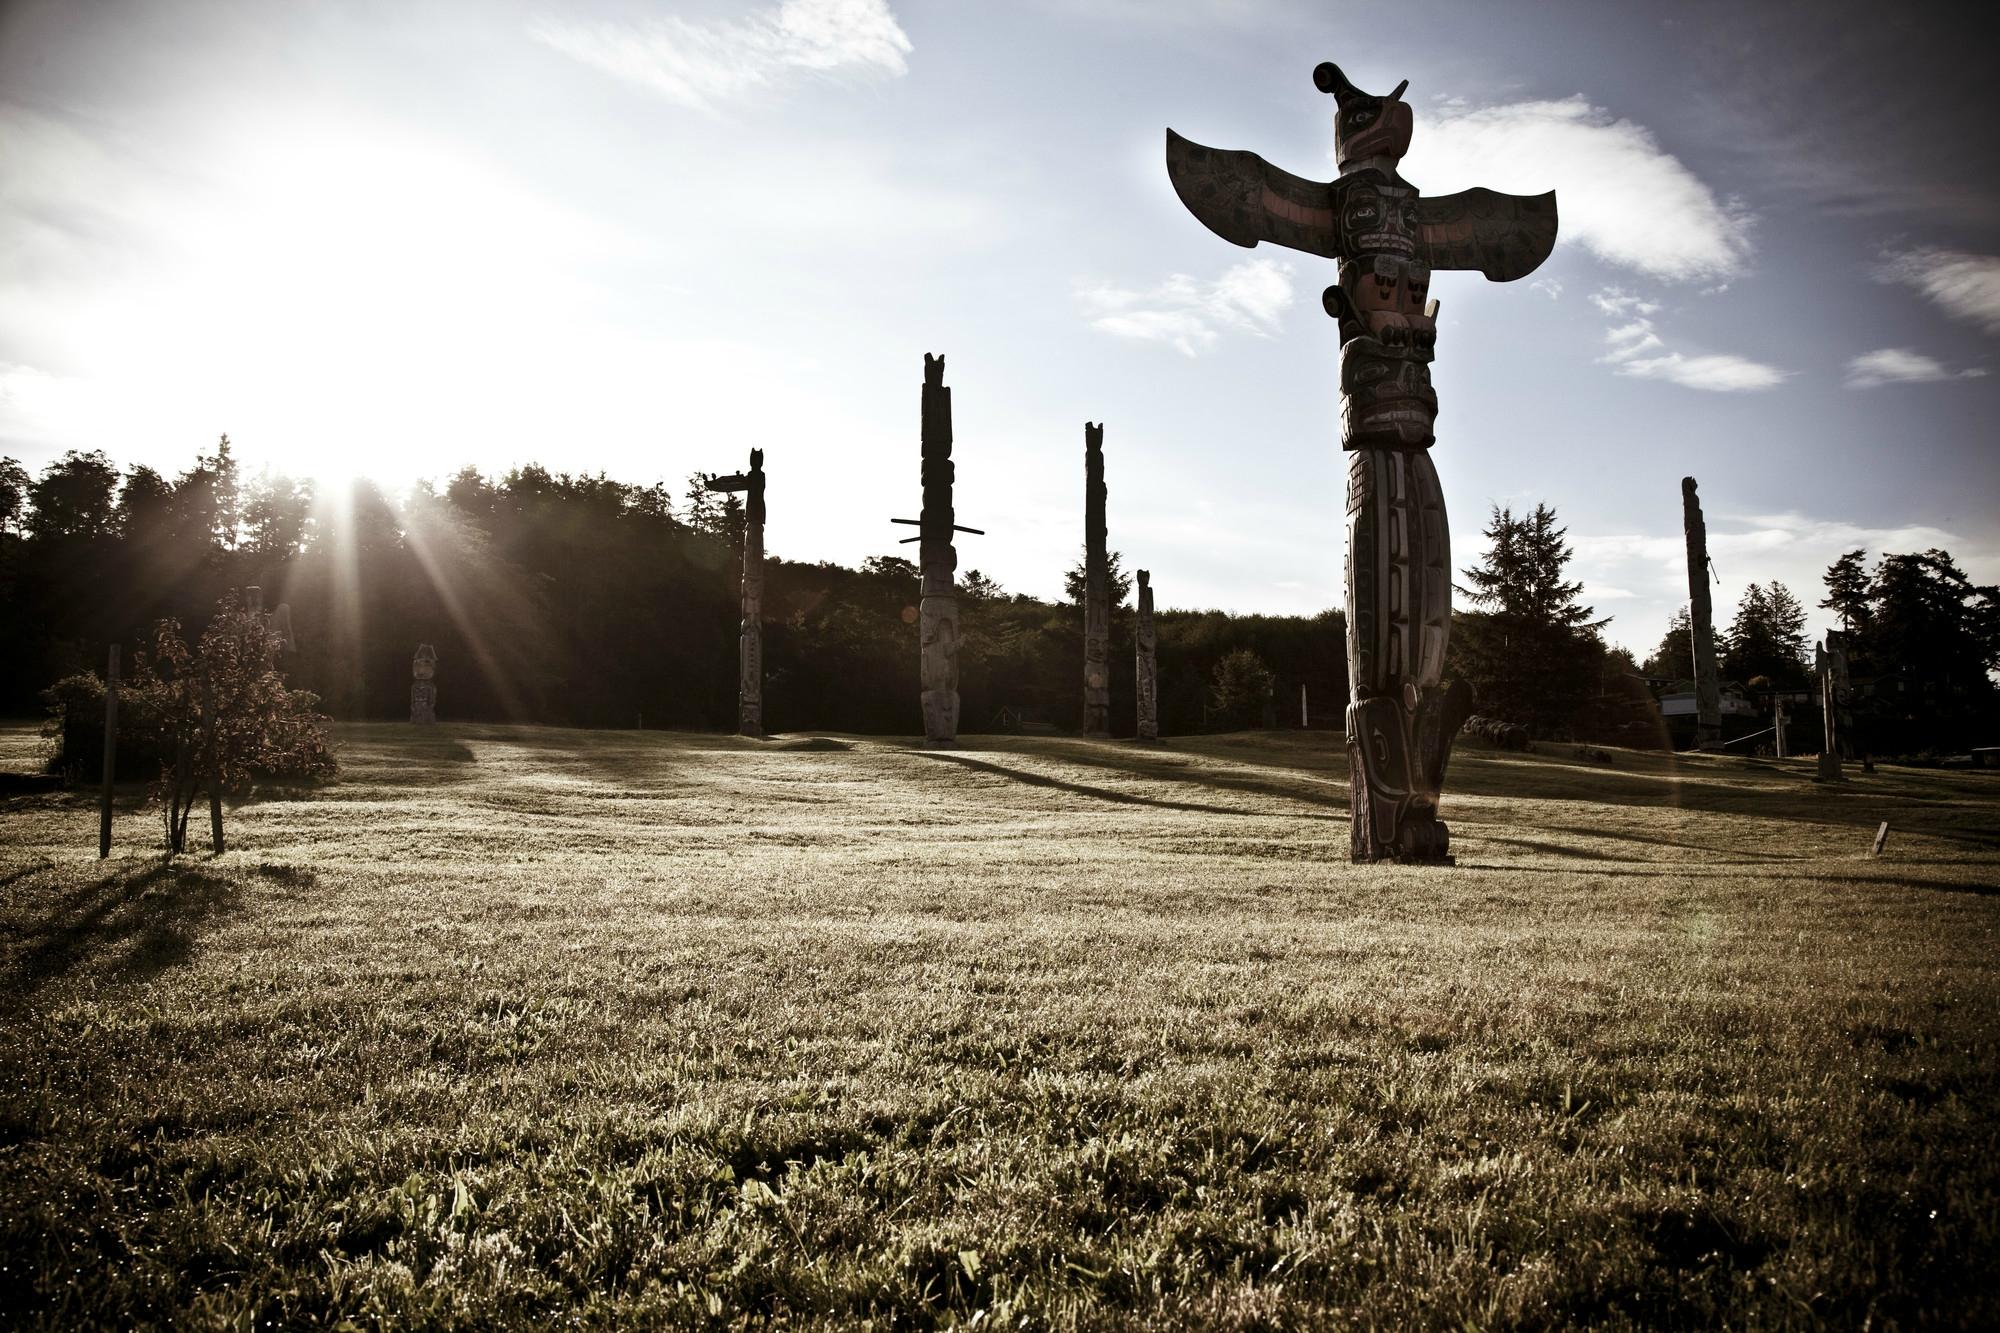 A collection of totem poles in a field with the sun shining behind them